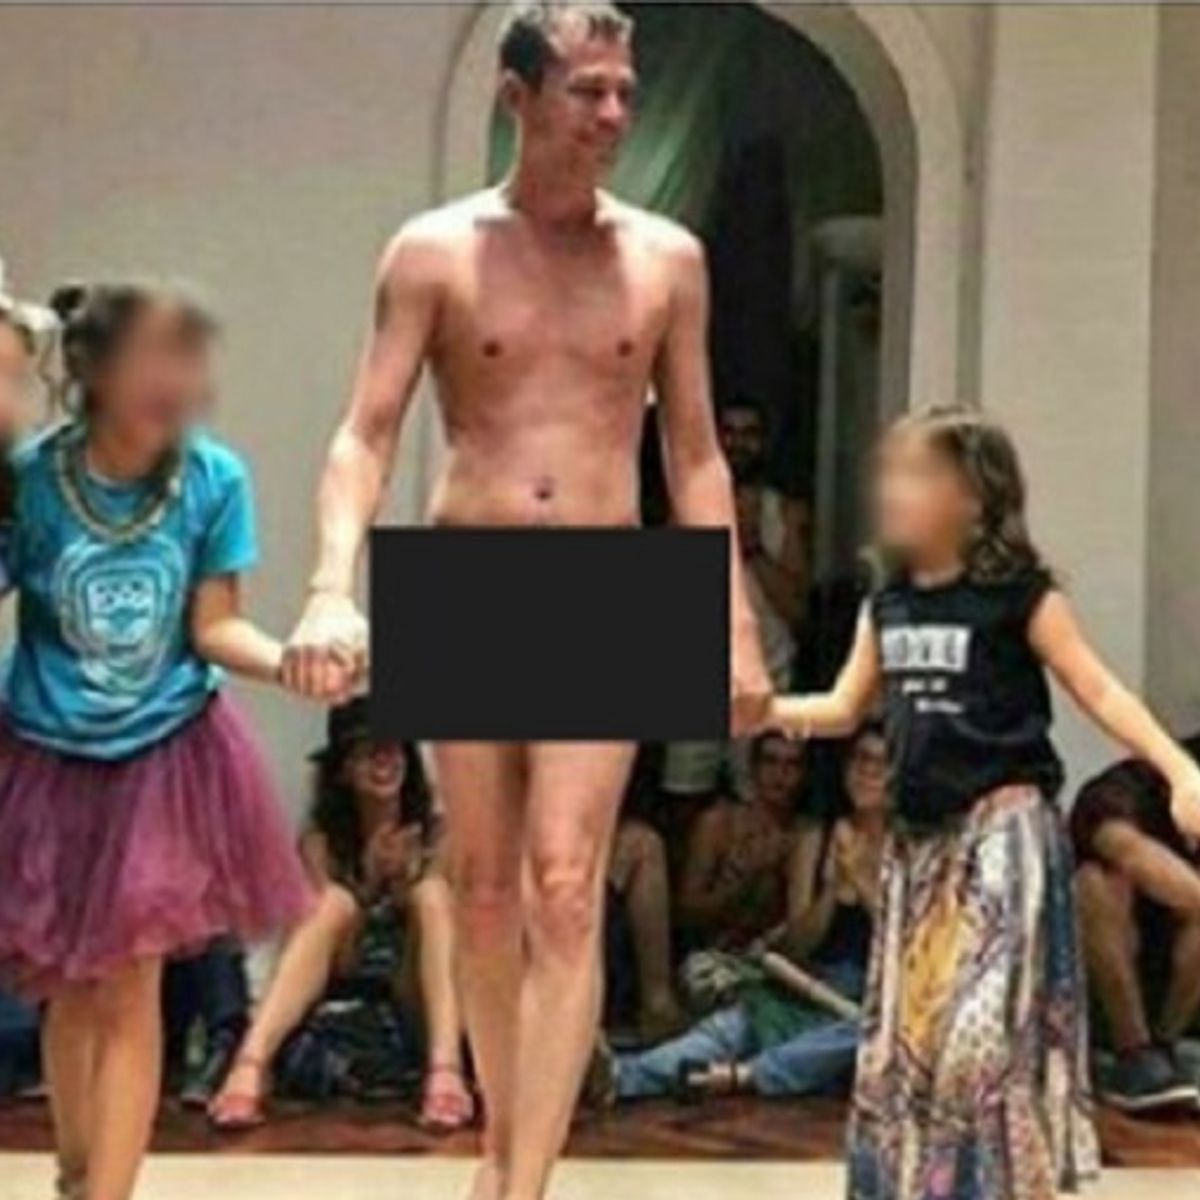 1200px x 1200px - Does This Photograph Show a Nude Man Walking the Runway with a Group of  Young Girls? | Snopes.com